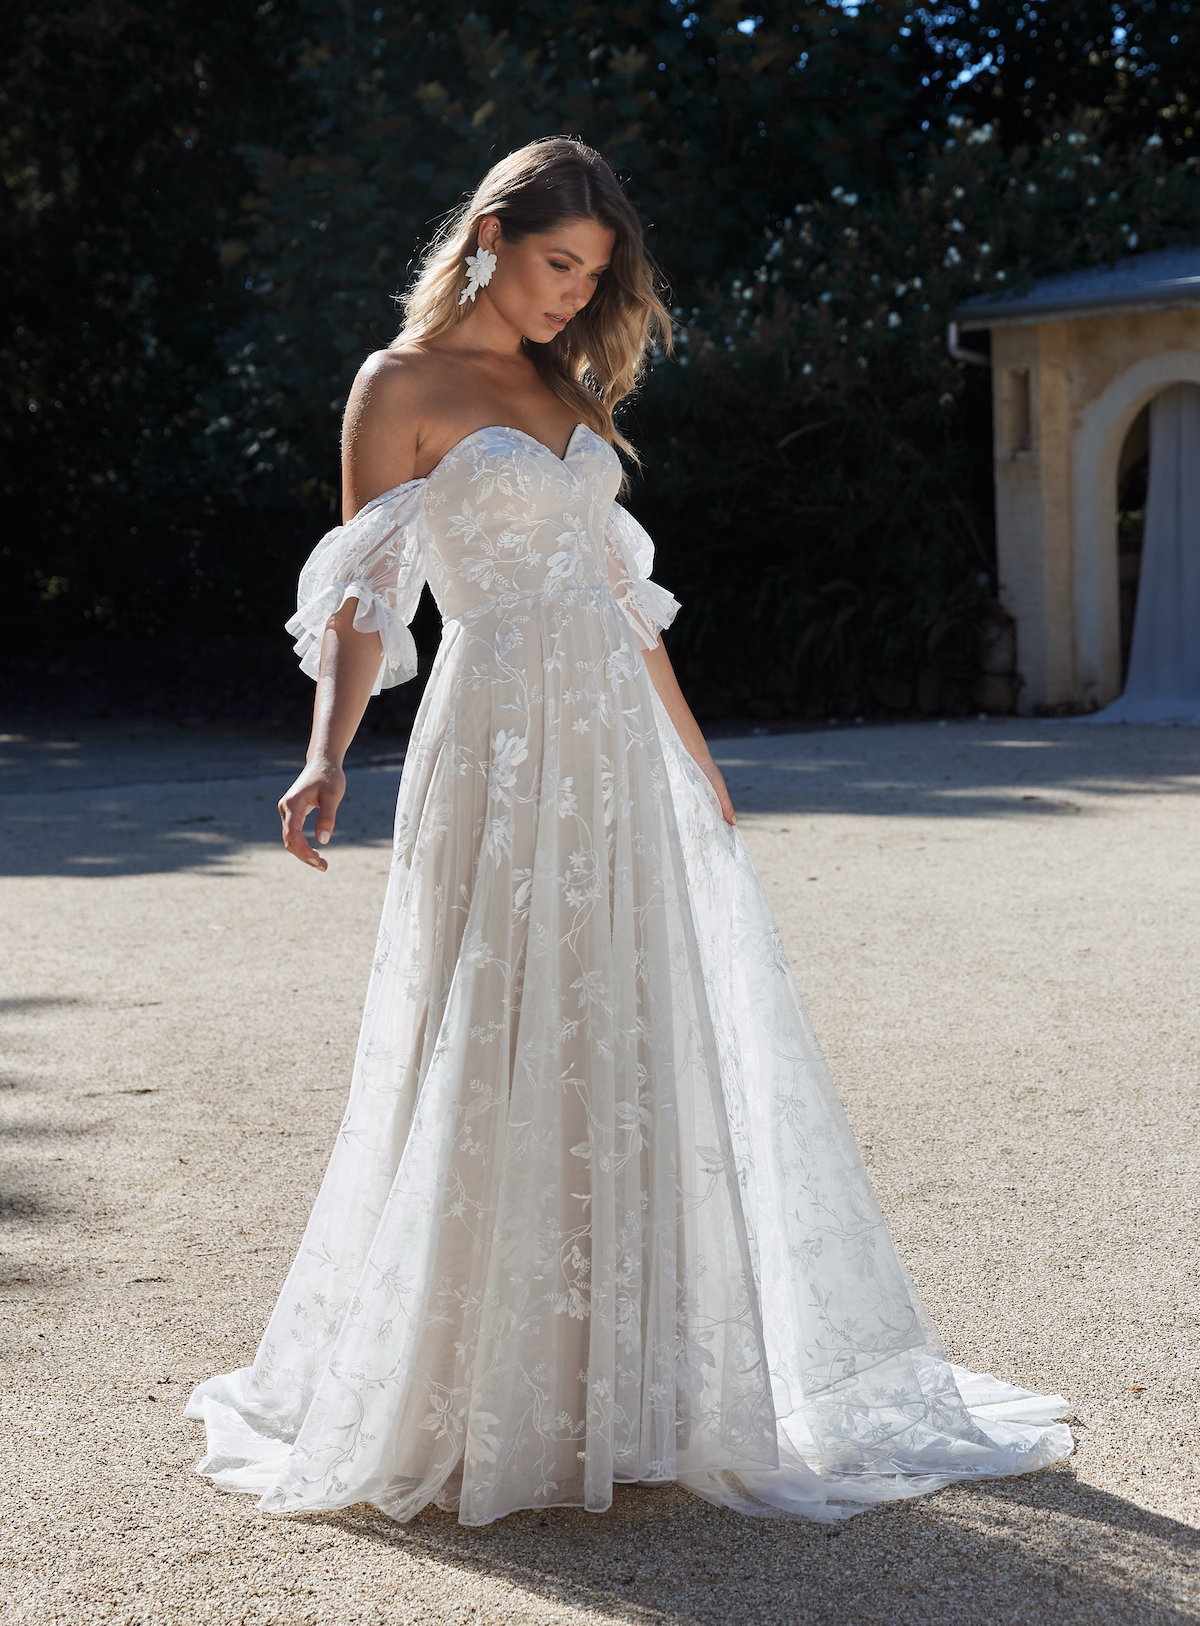 Evie Young Lace Wedding Dress